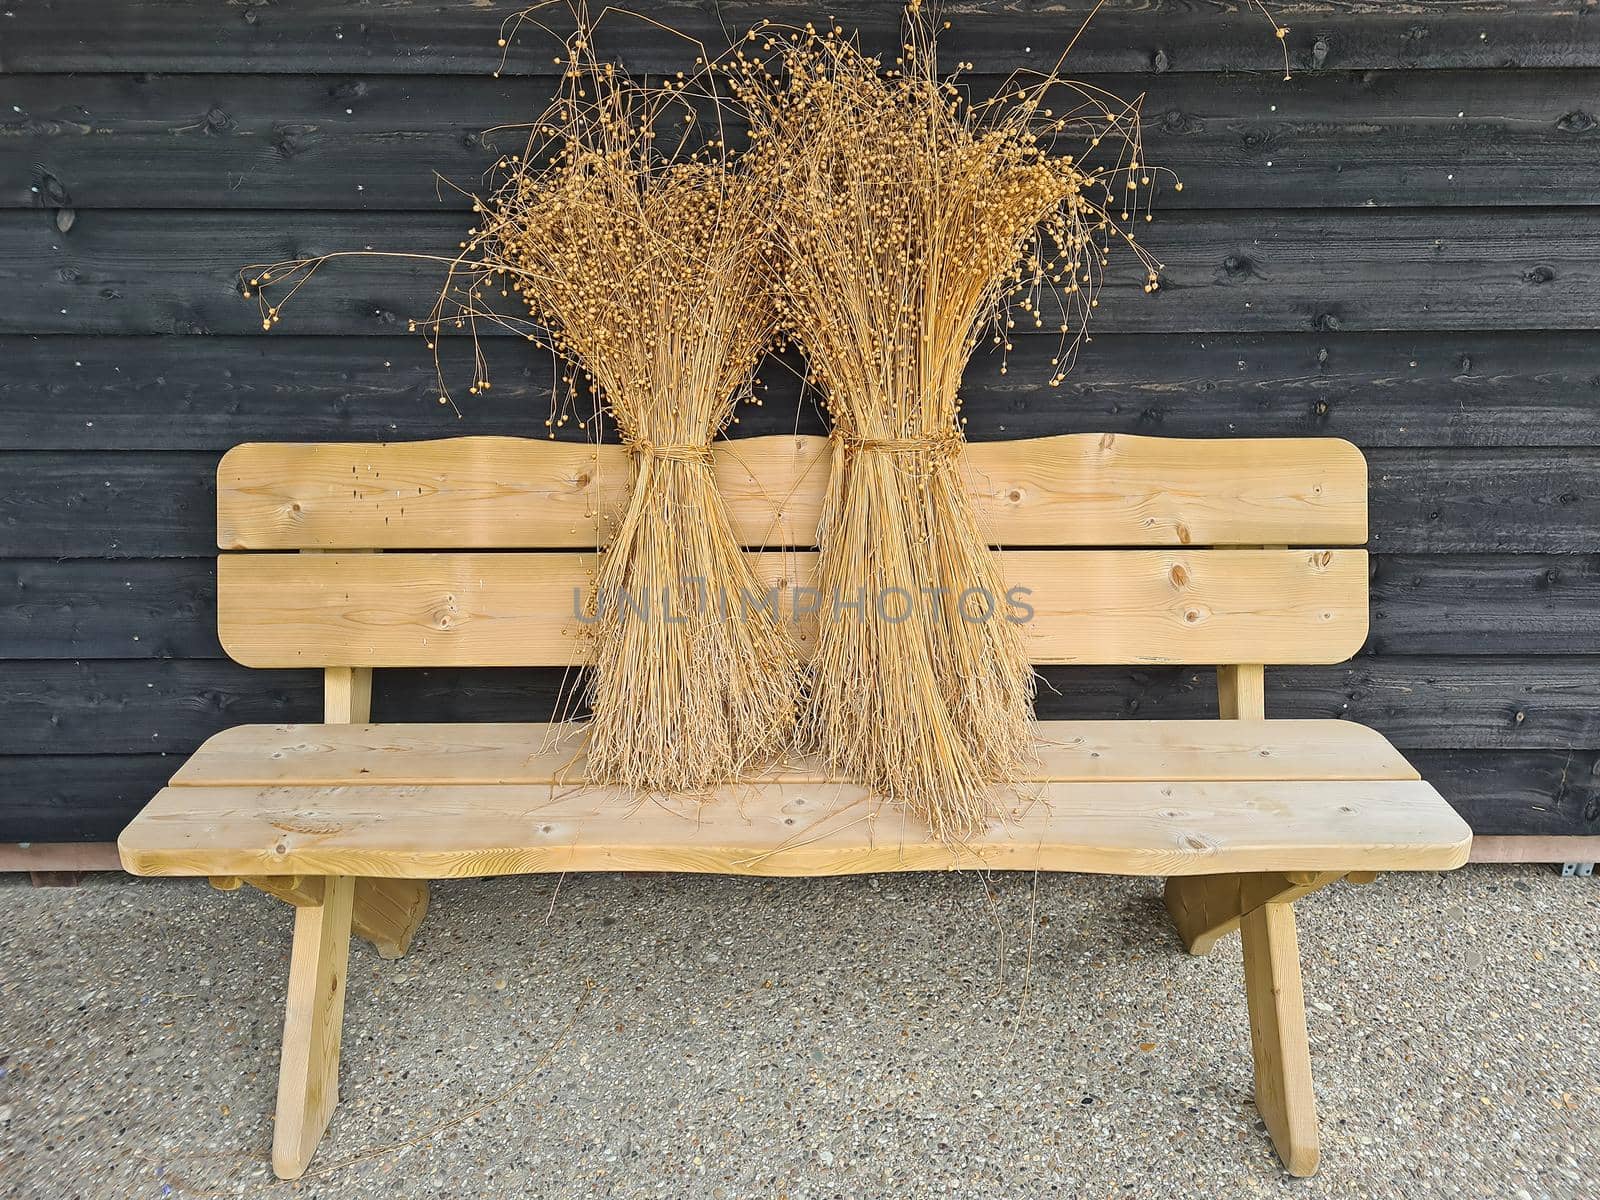 Sheaves of wheat on a wooden bench by devy